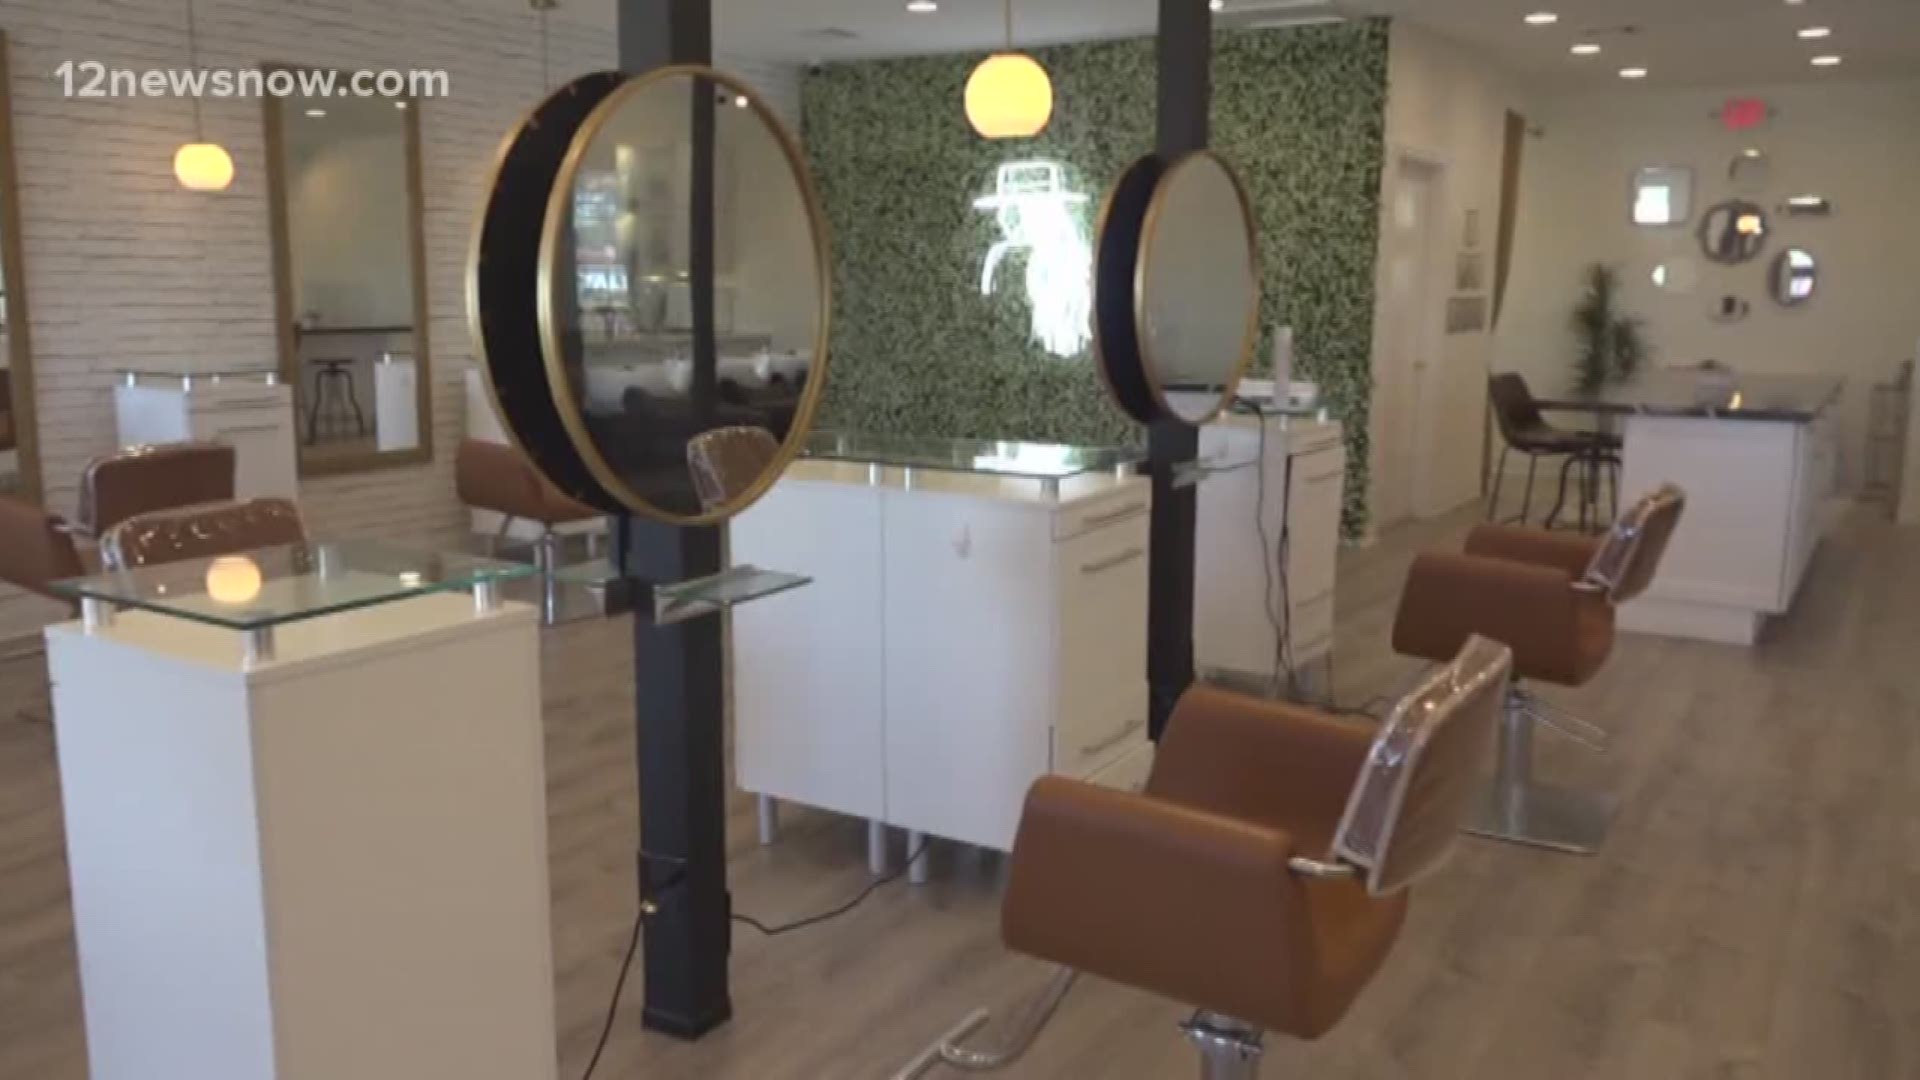 Stylists say they've been preparing to reopen safely for weeks